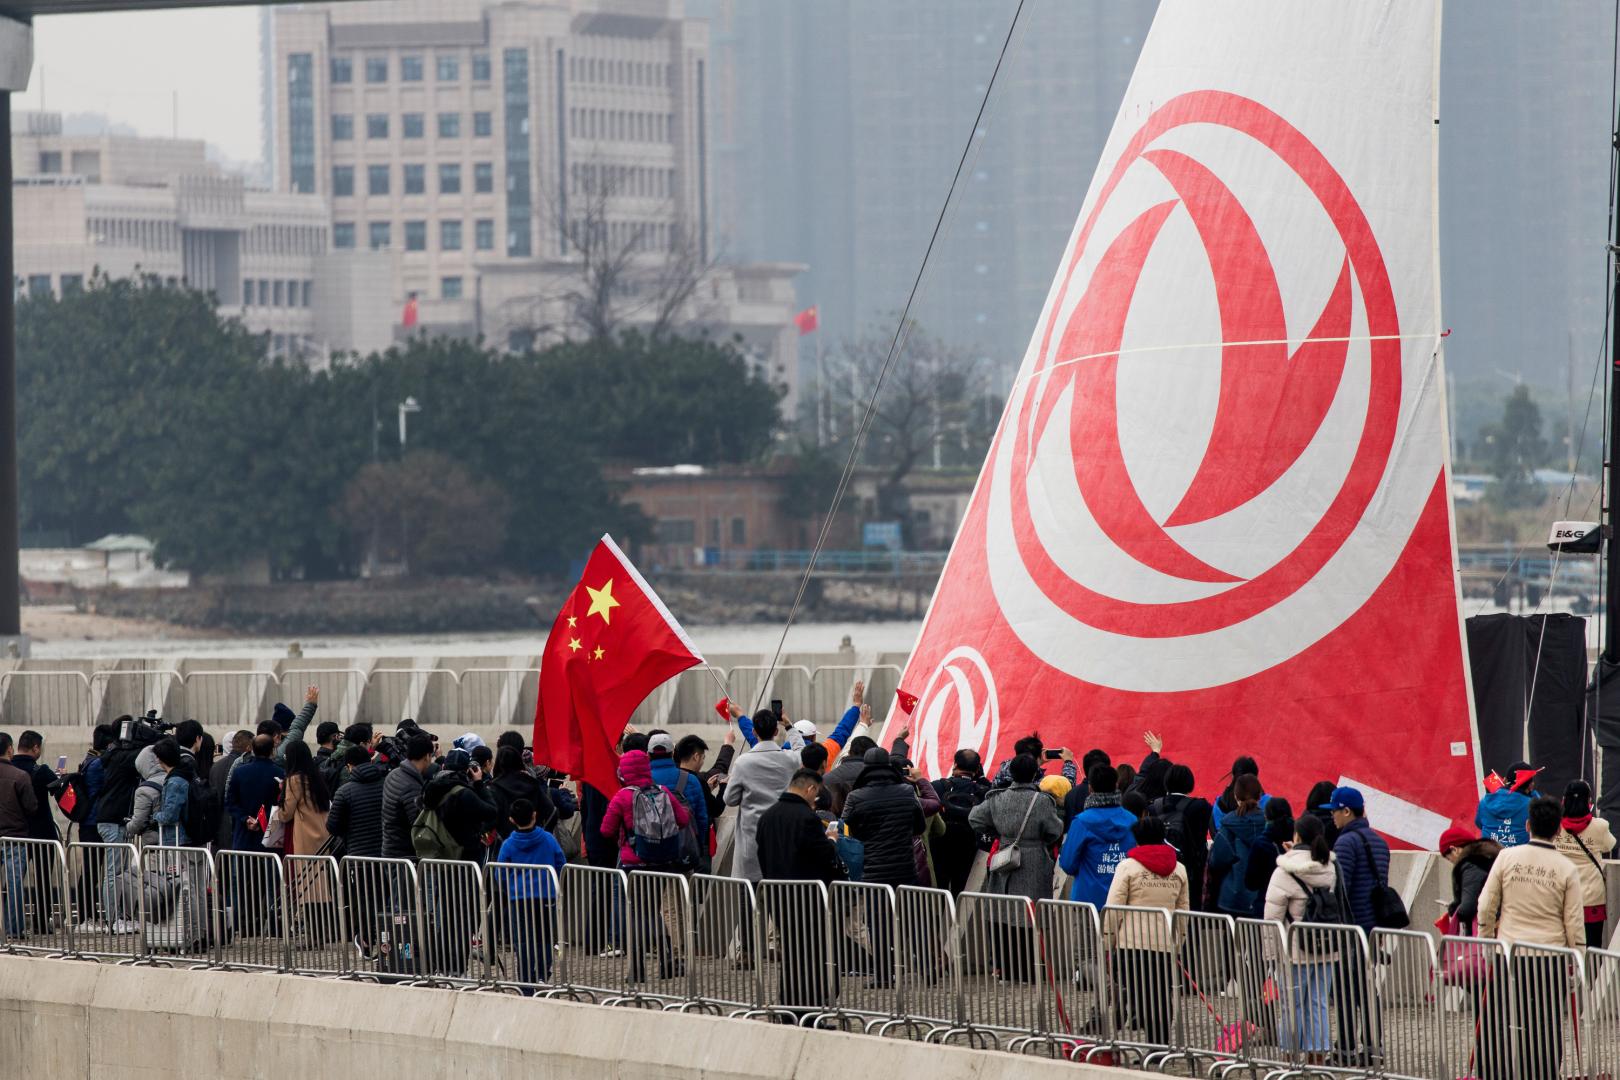 The Chinese Dongfeng Race Team in Guangzhou, China